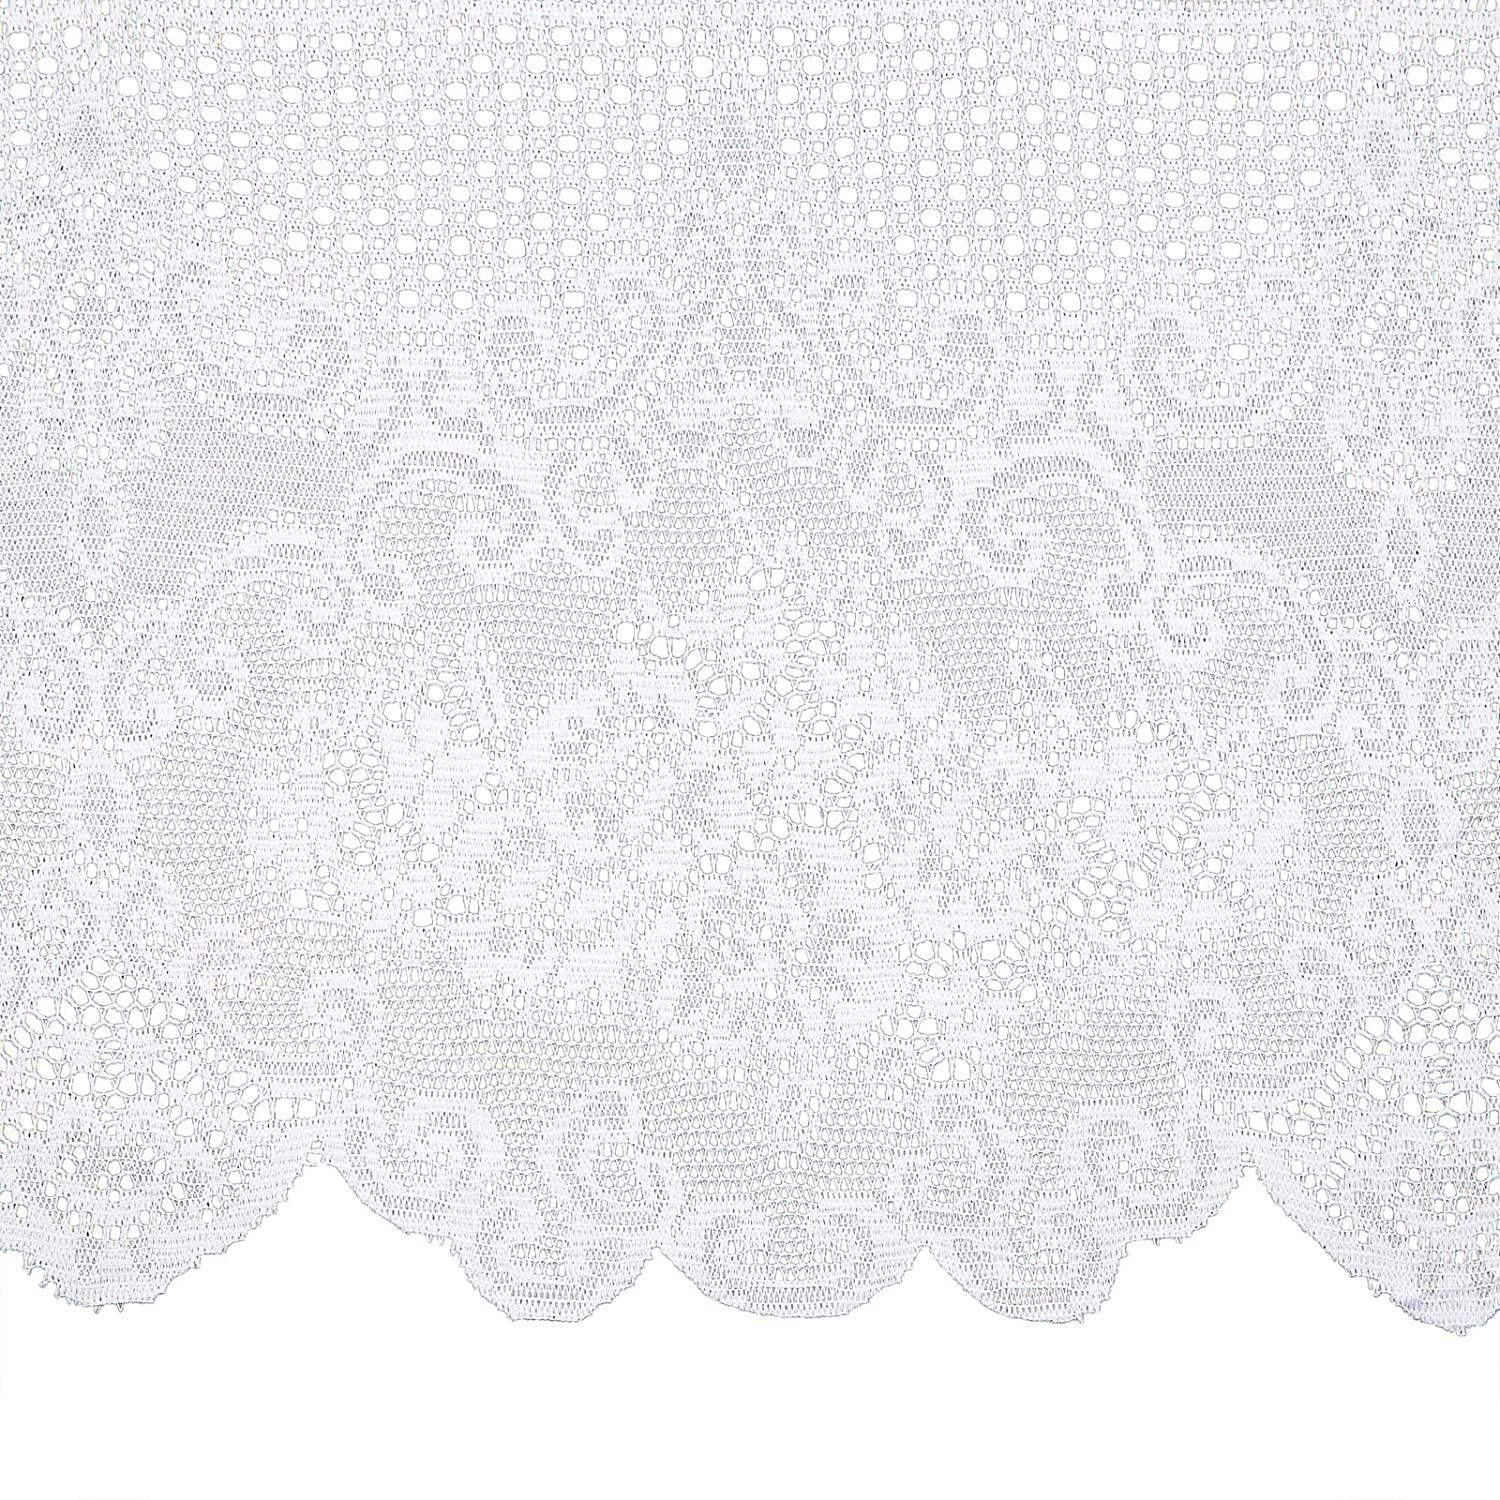 White Lace Tablecloth for Rectangular Tables, Vintage Style for Formal Dining, Dinner Parties, Wedding, Baby Shower (60 x 97 in) - Lasercutwraps Shop